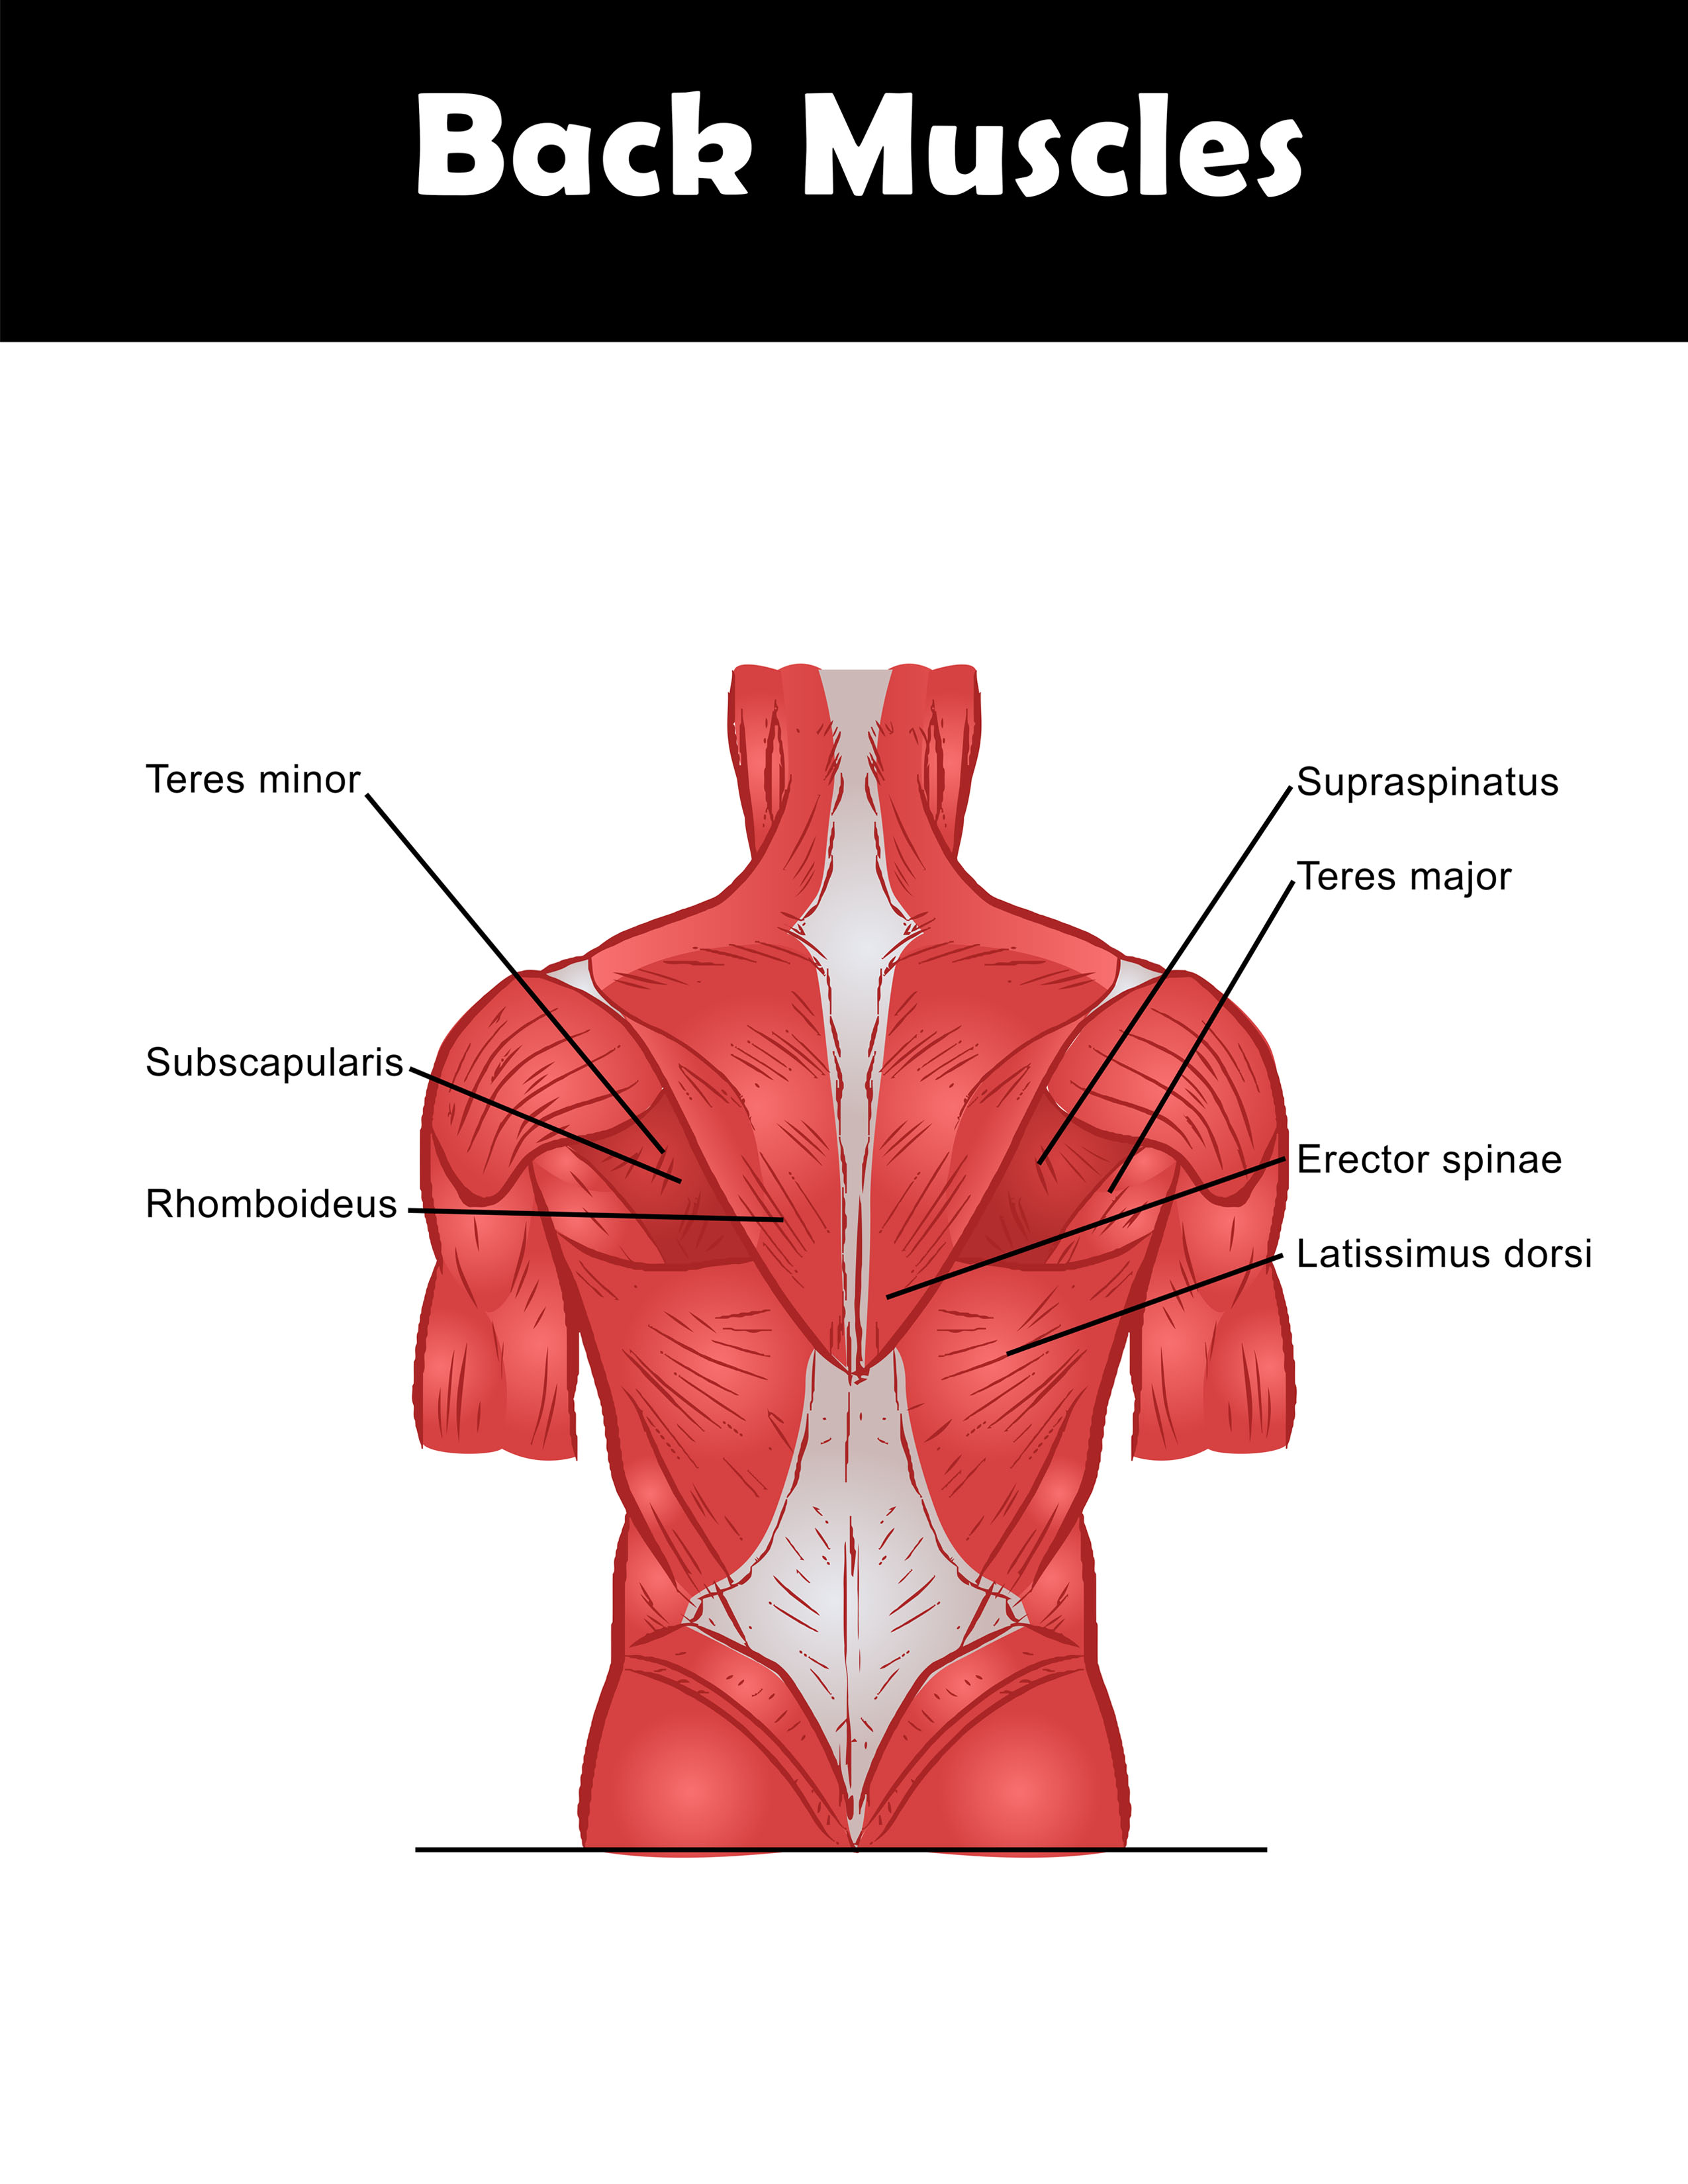 Back muscles anatomy chart you can download and print.